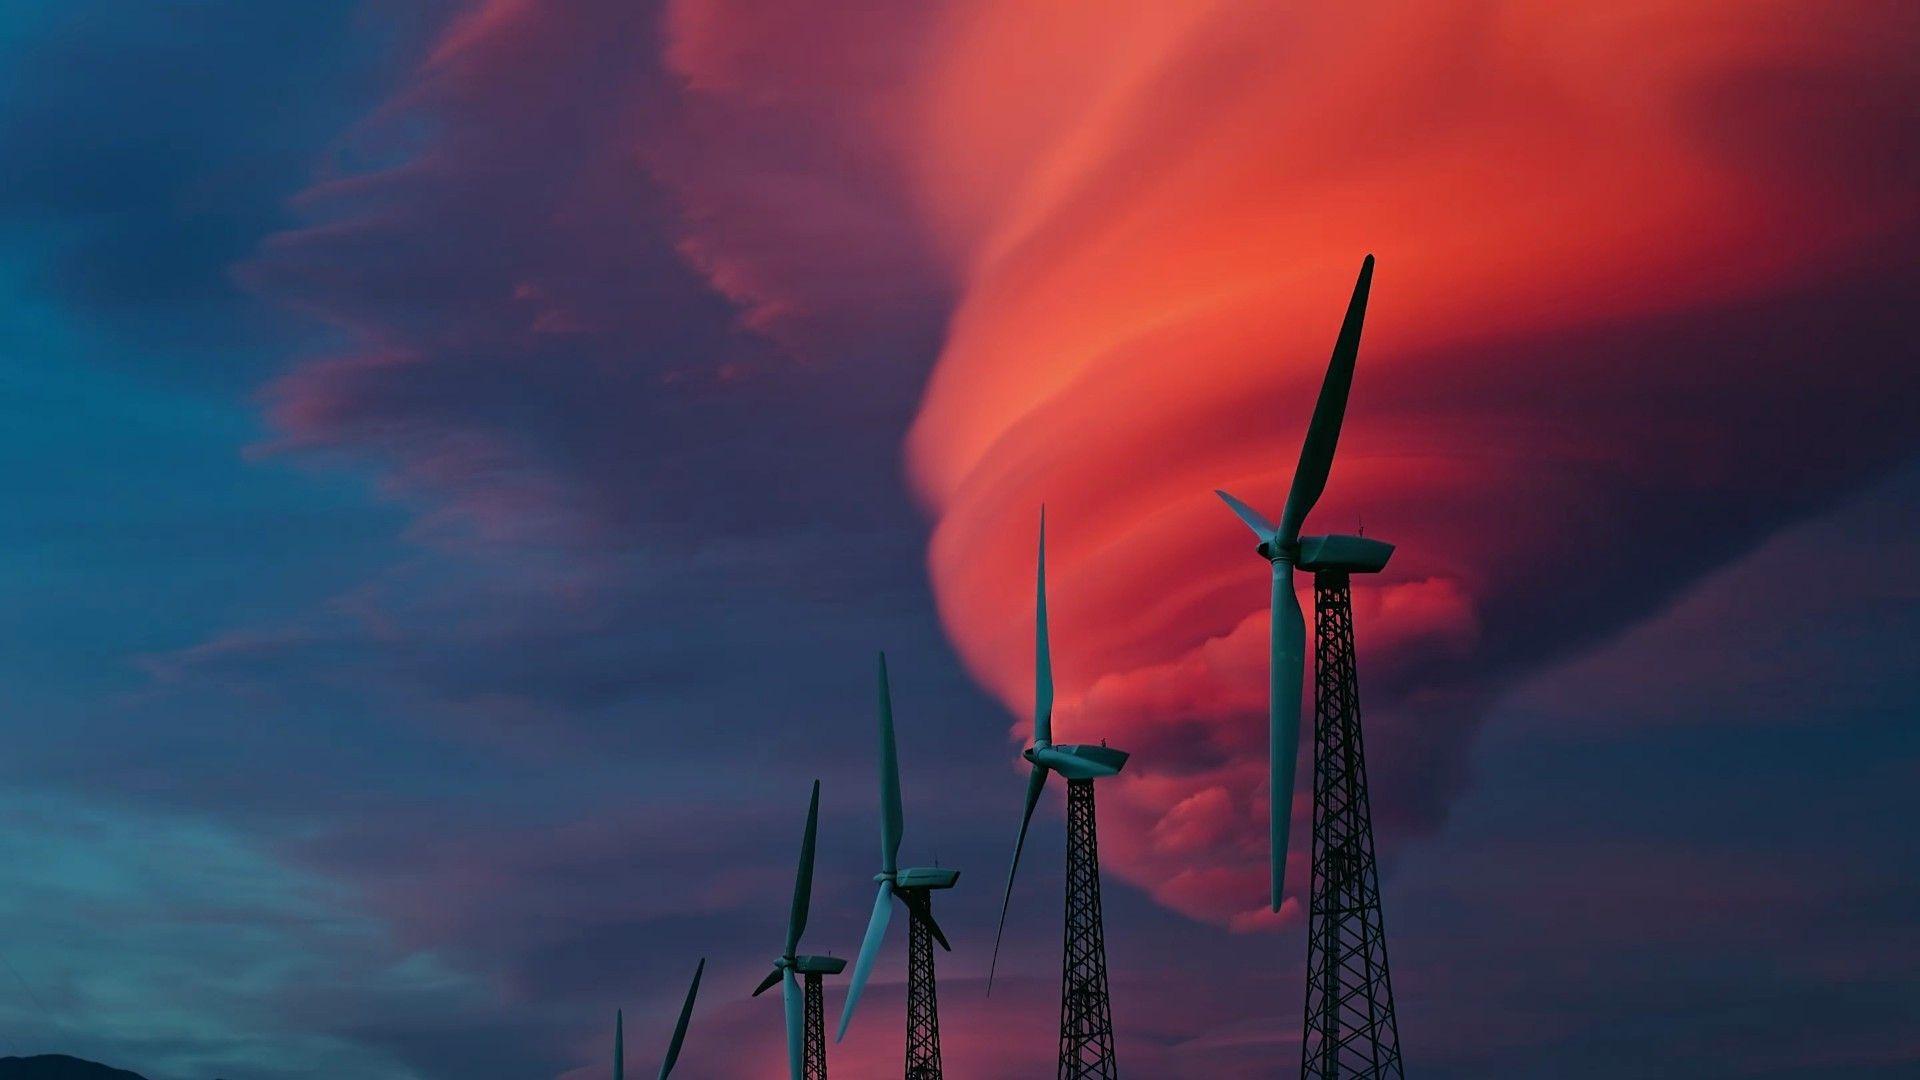 Windmills and red clouds. Android wallpaper for free